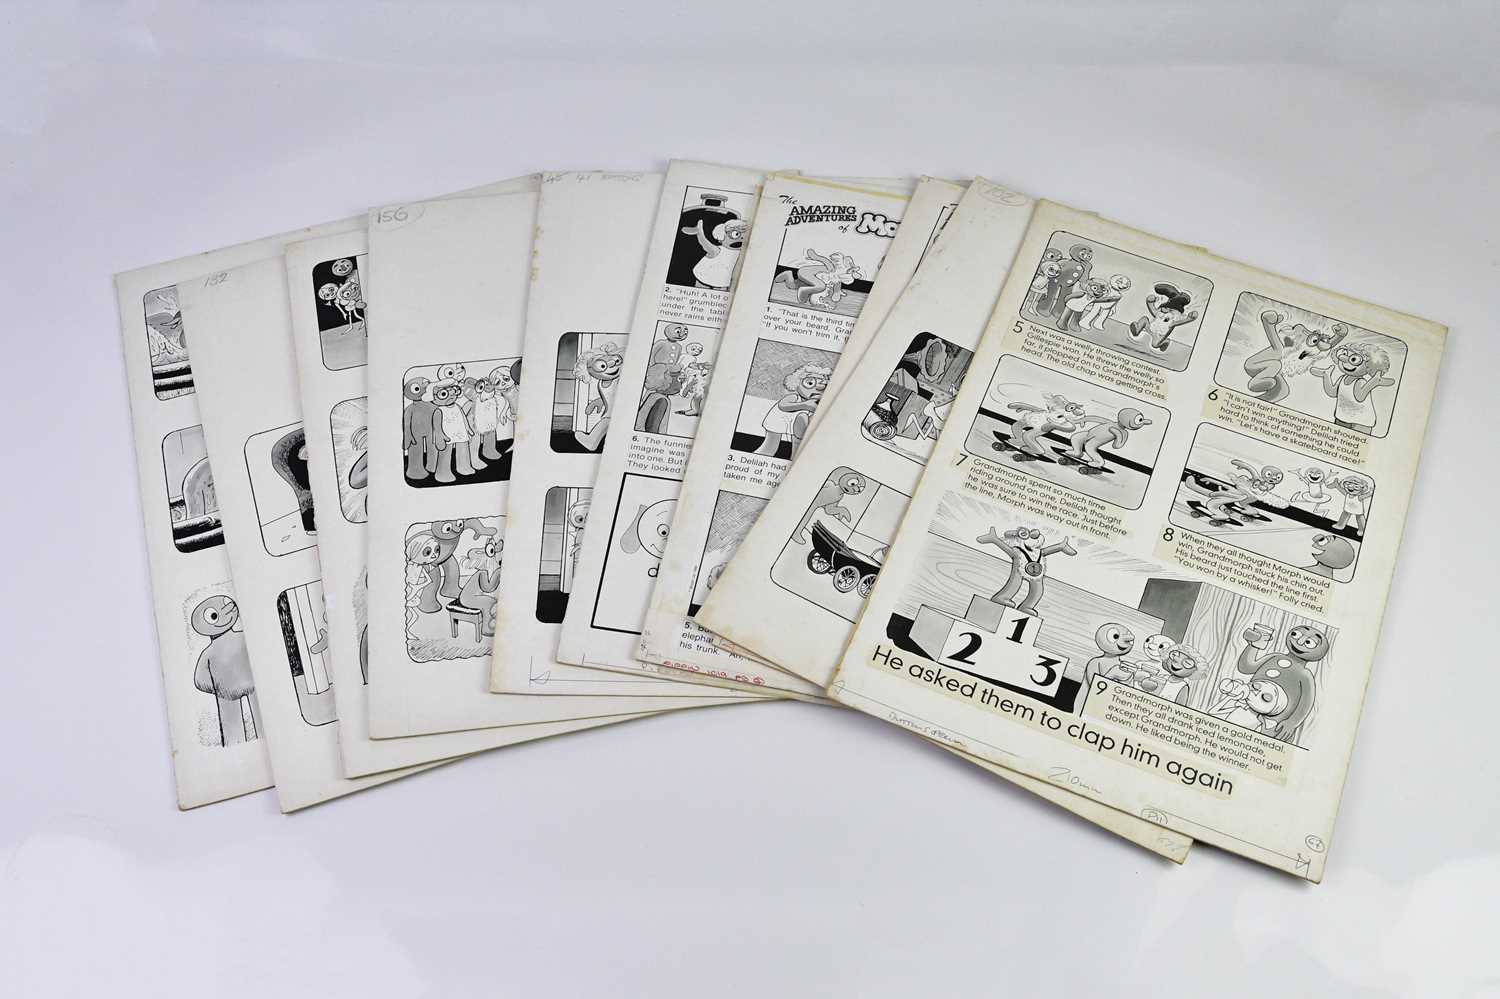 † BILL MEVIN; ten original black and white storyboard cartoons for Morph produced for holiday